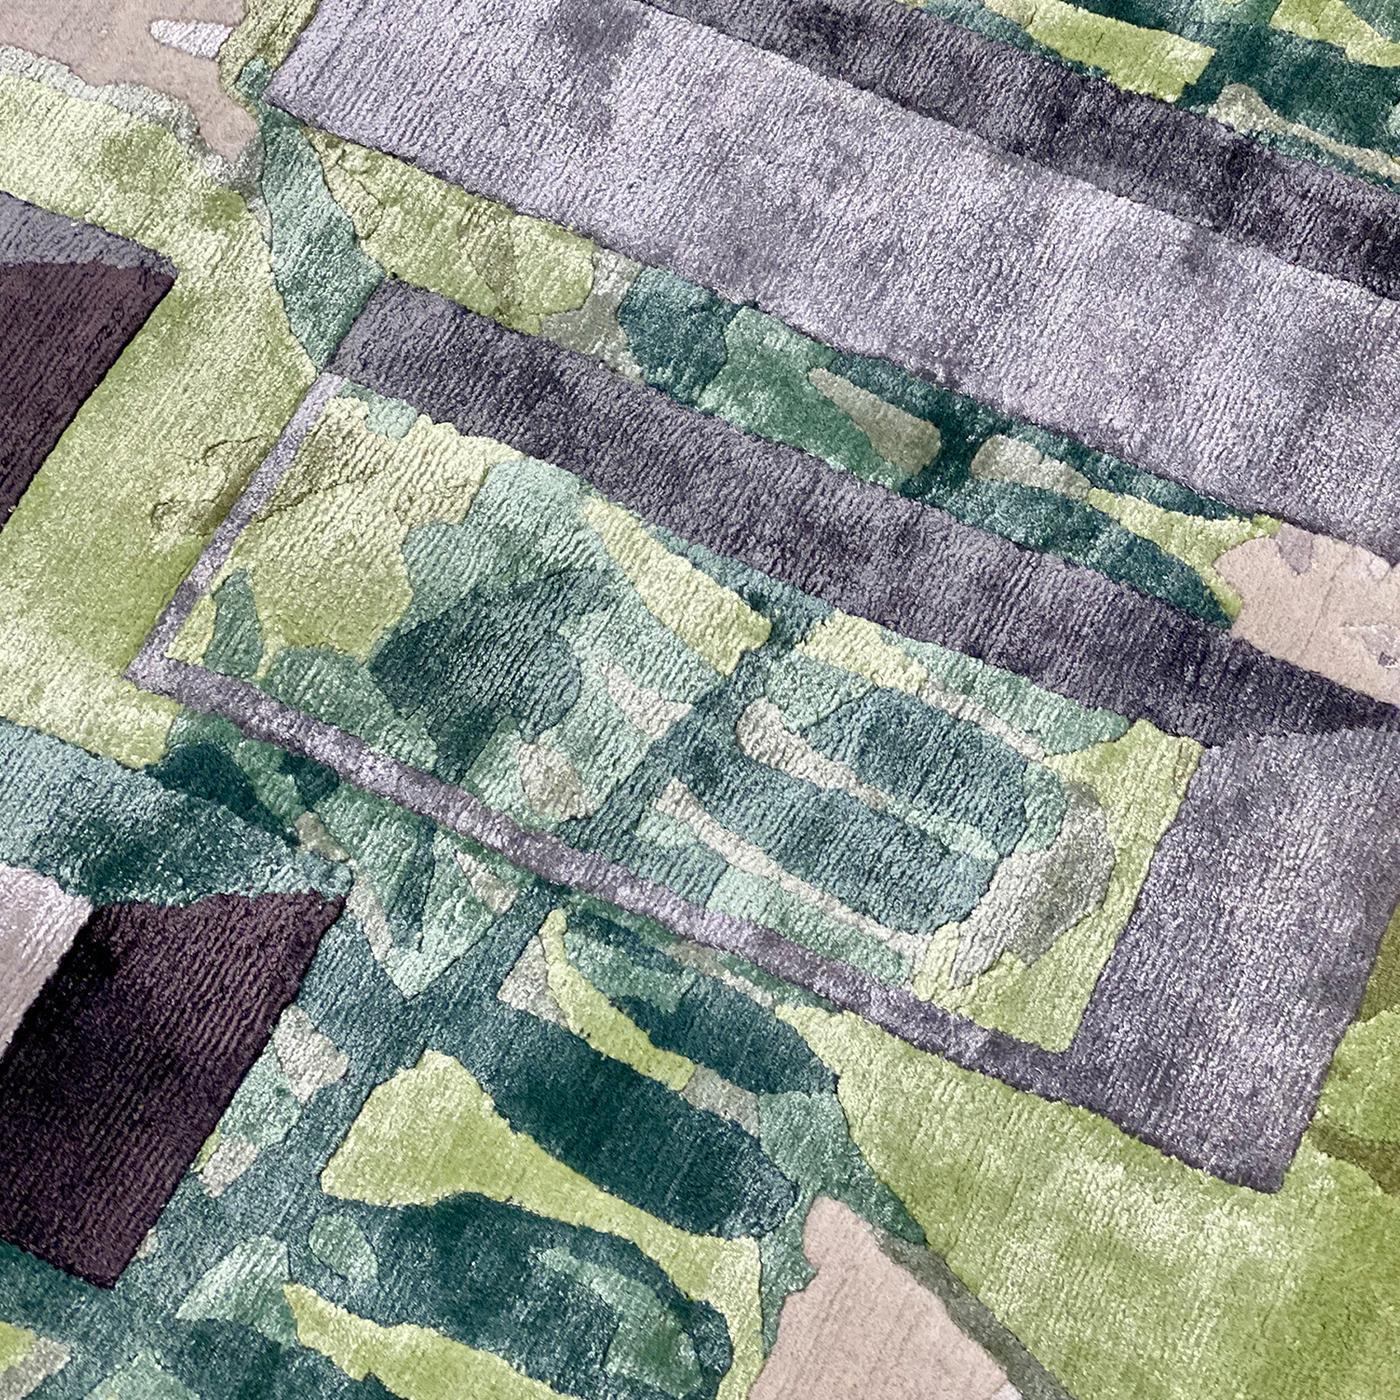 Foliage in different shades of green threads softens the rigor of the background in this splendid rug (base H .05 cm and design H .07cm). Knotted by hand in Nepal of 50% silk and 50% Himalayan wool with 152,000 knot/sqm, it invites to reflect on the